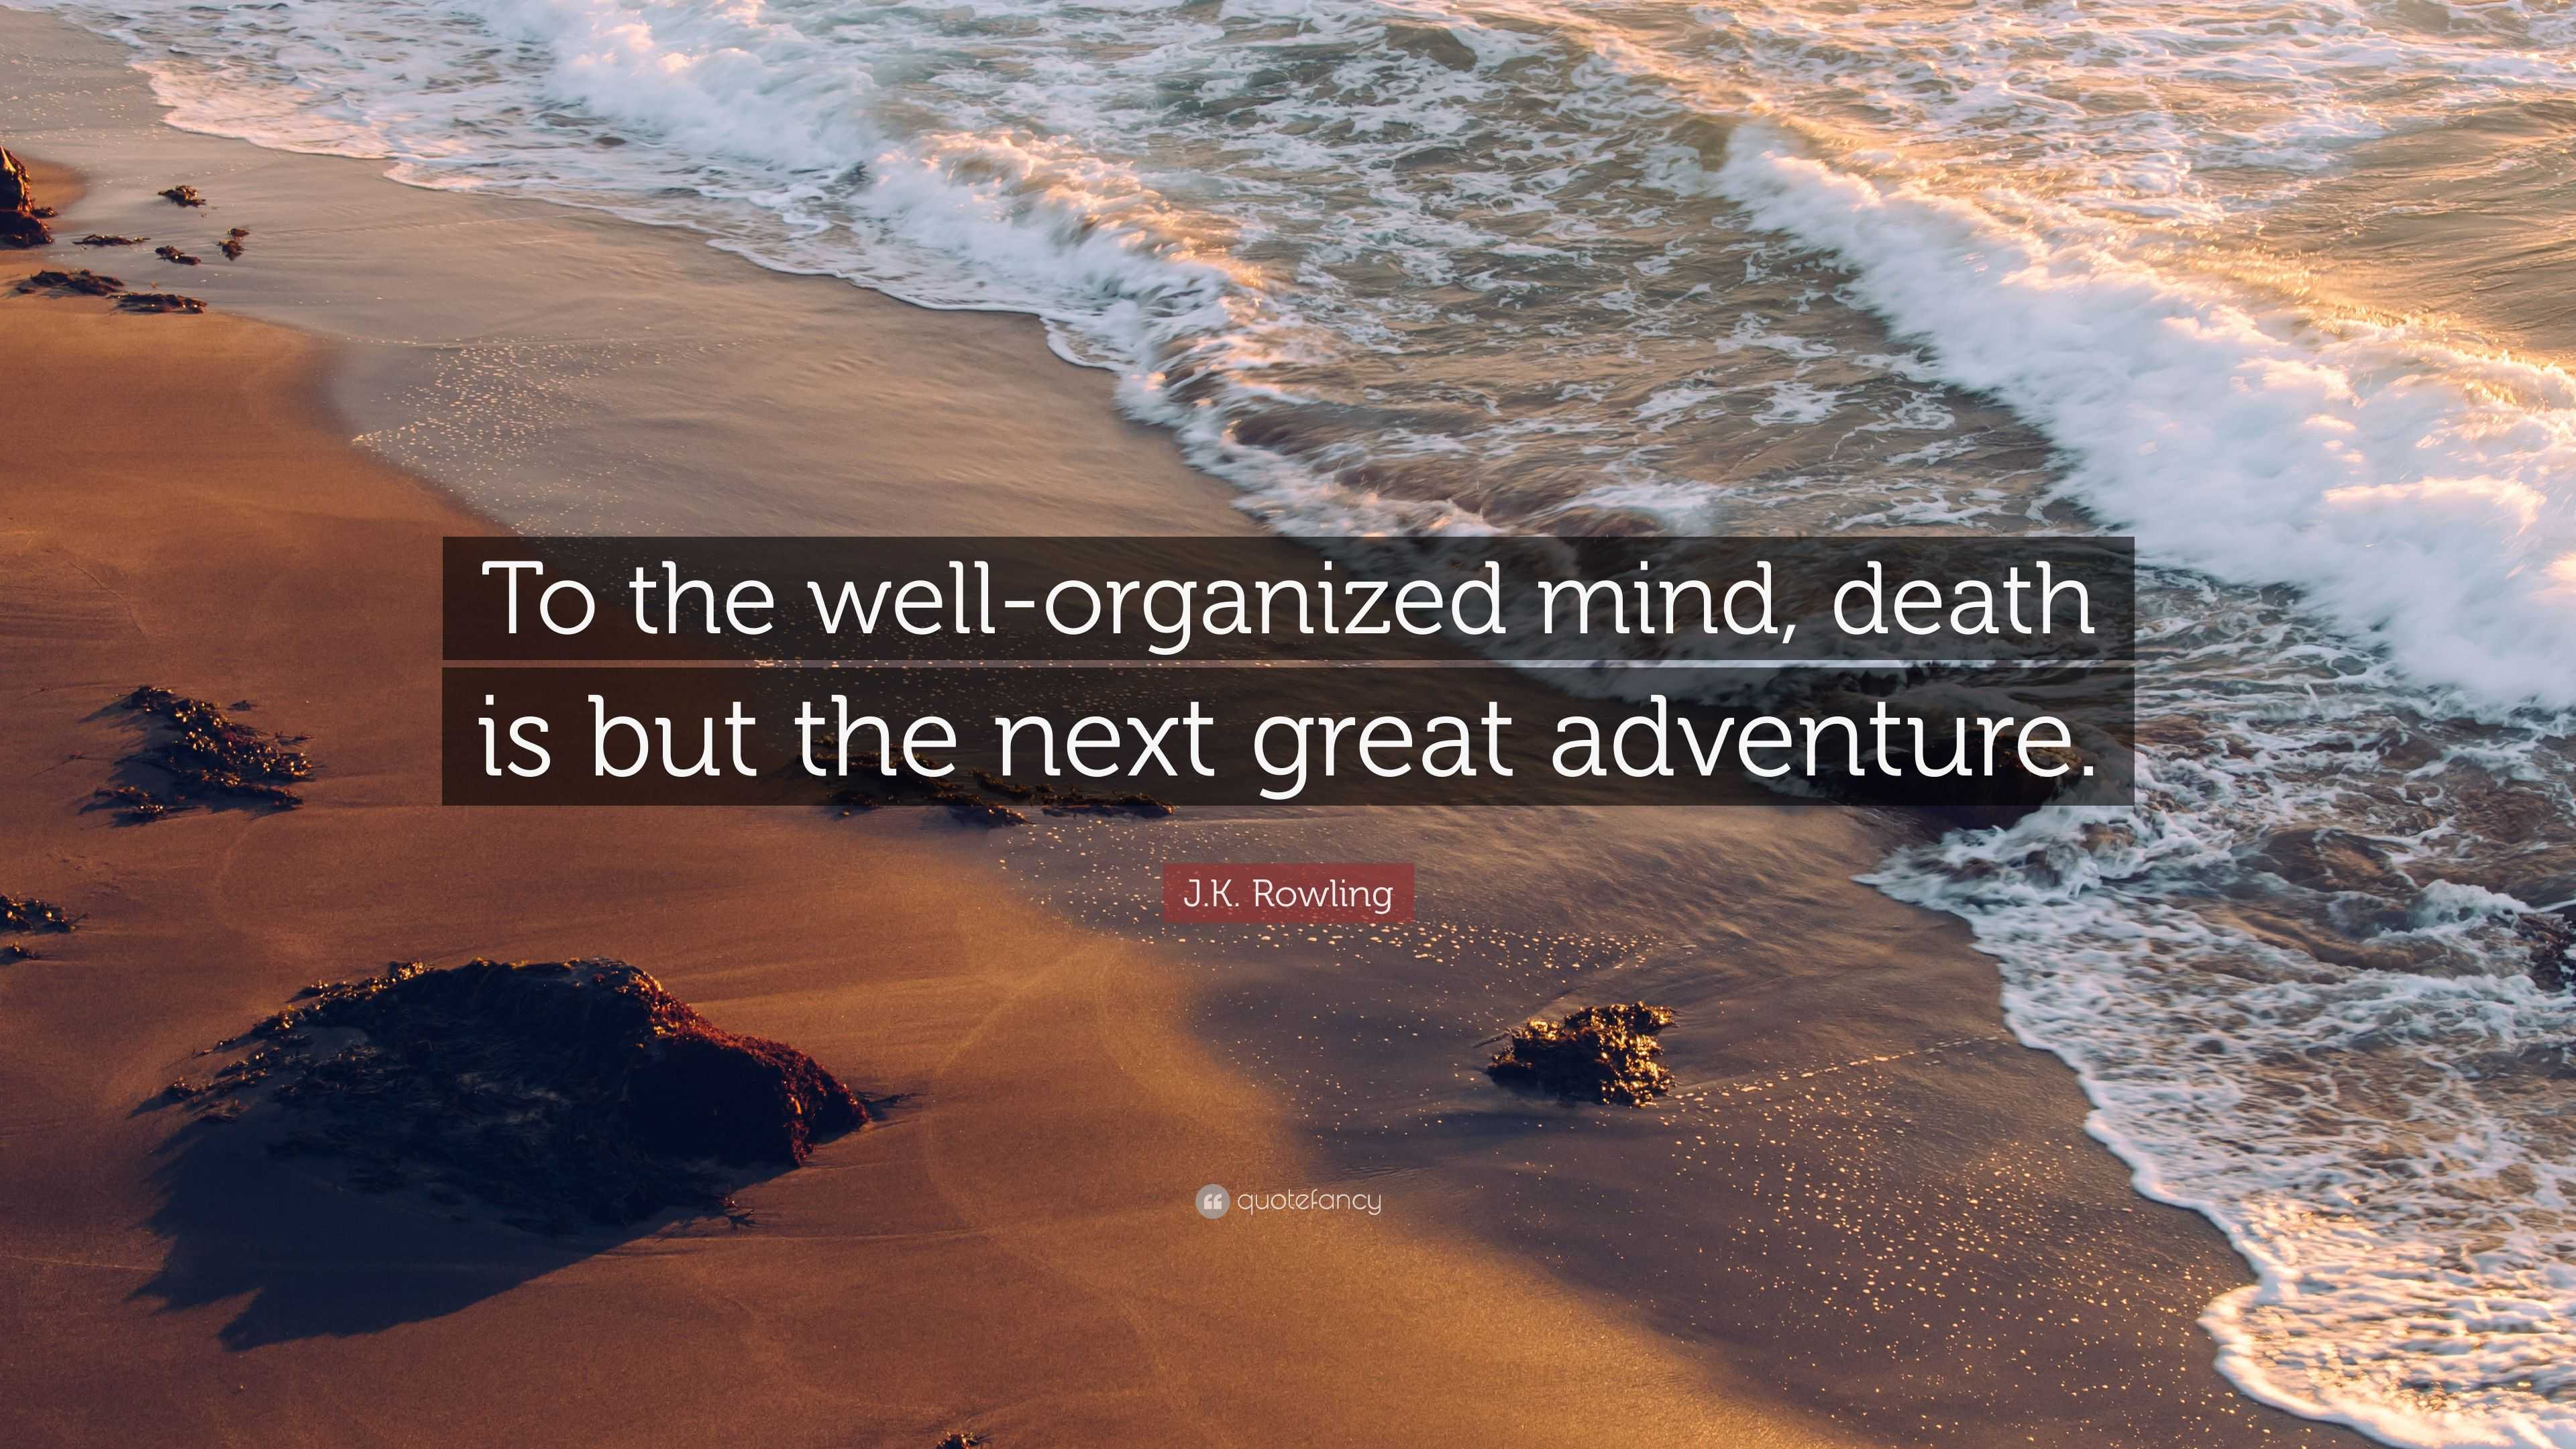 After All to the well-organized mind DEATH is but the Next GREAT